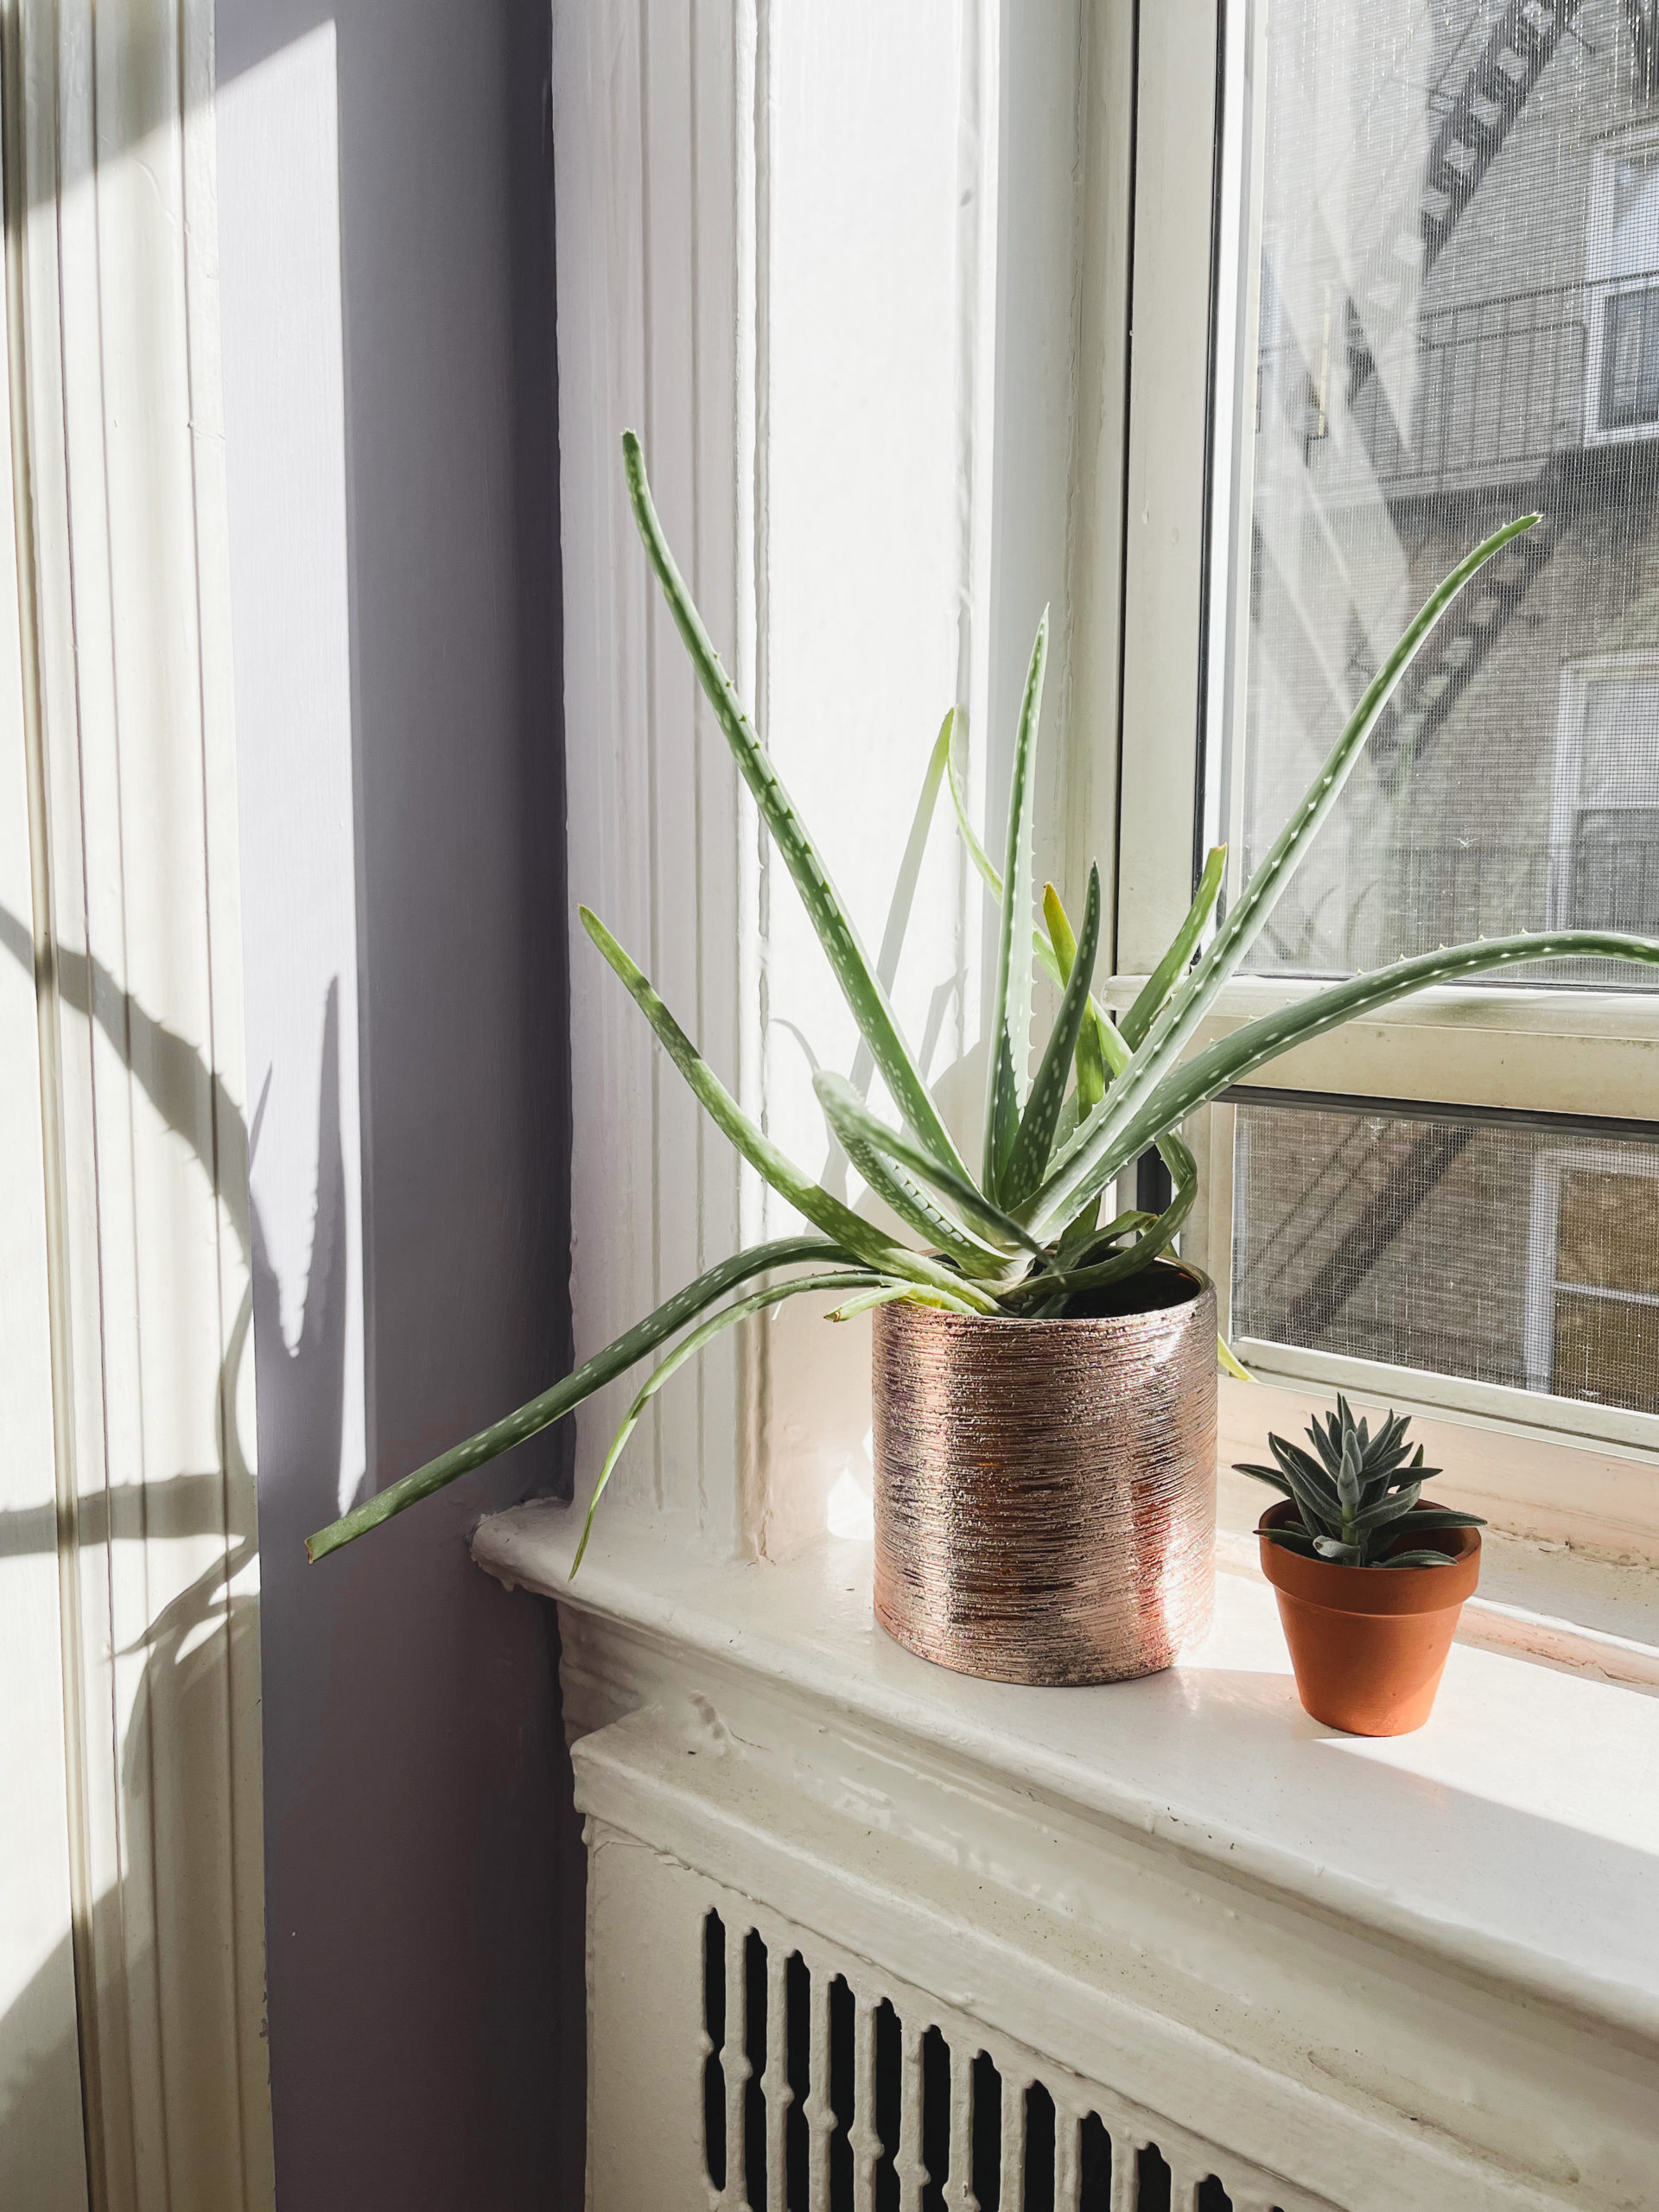 sunny window with growing plants